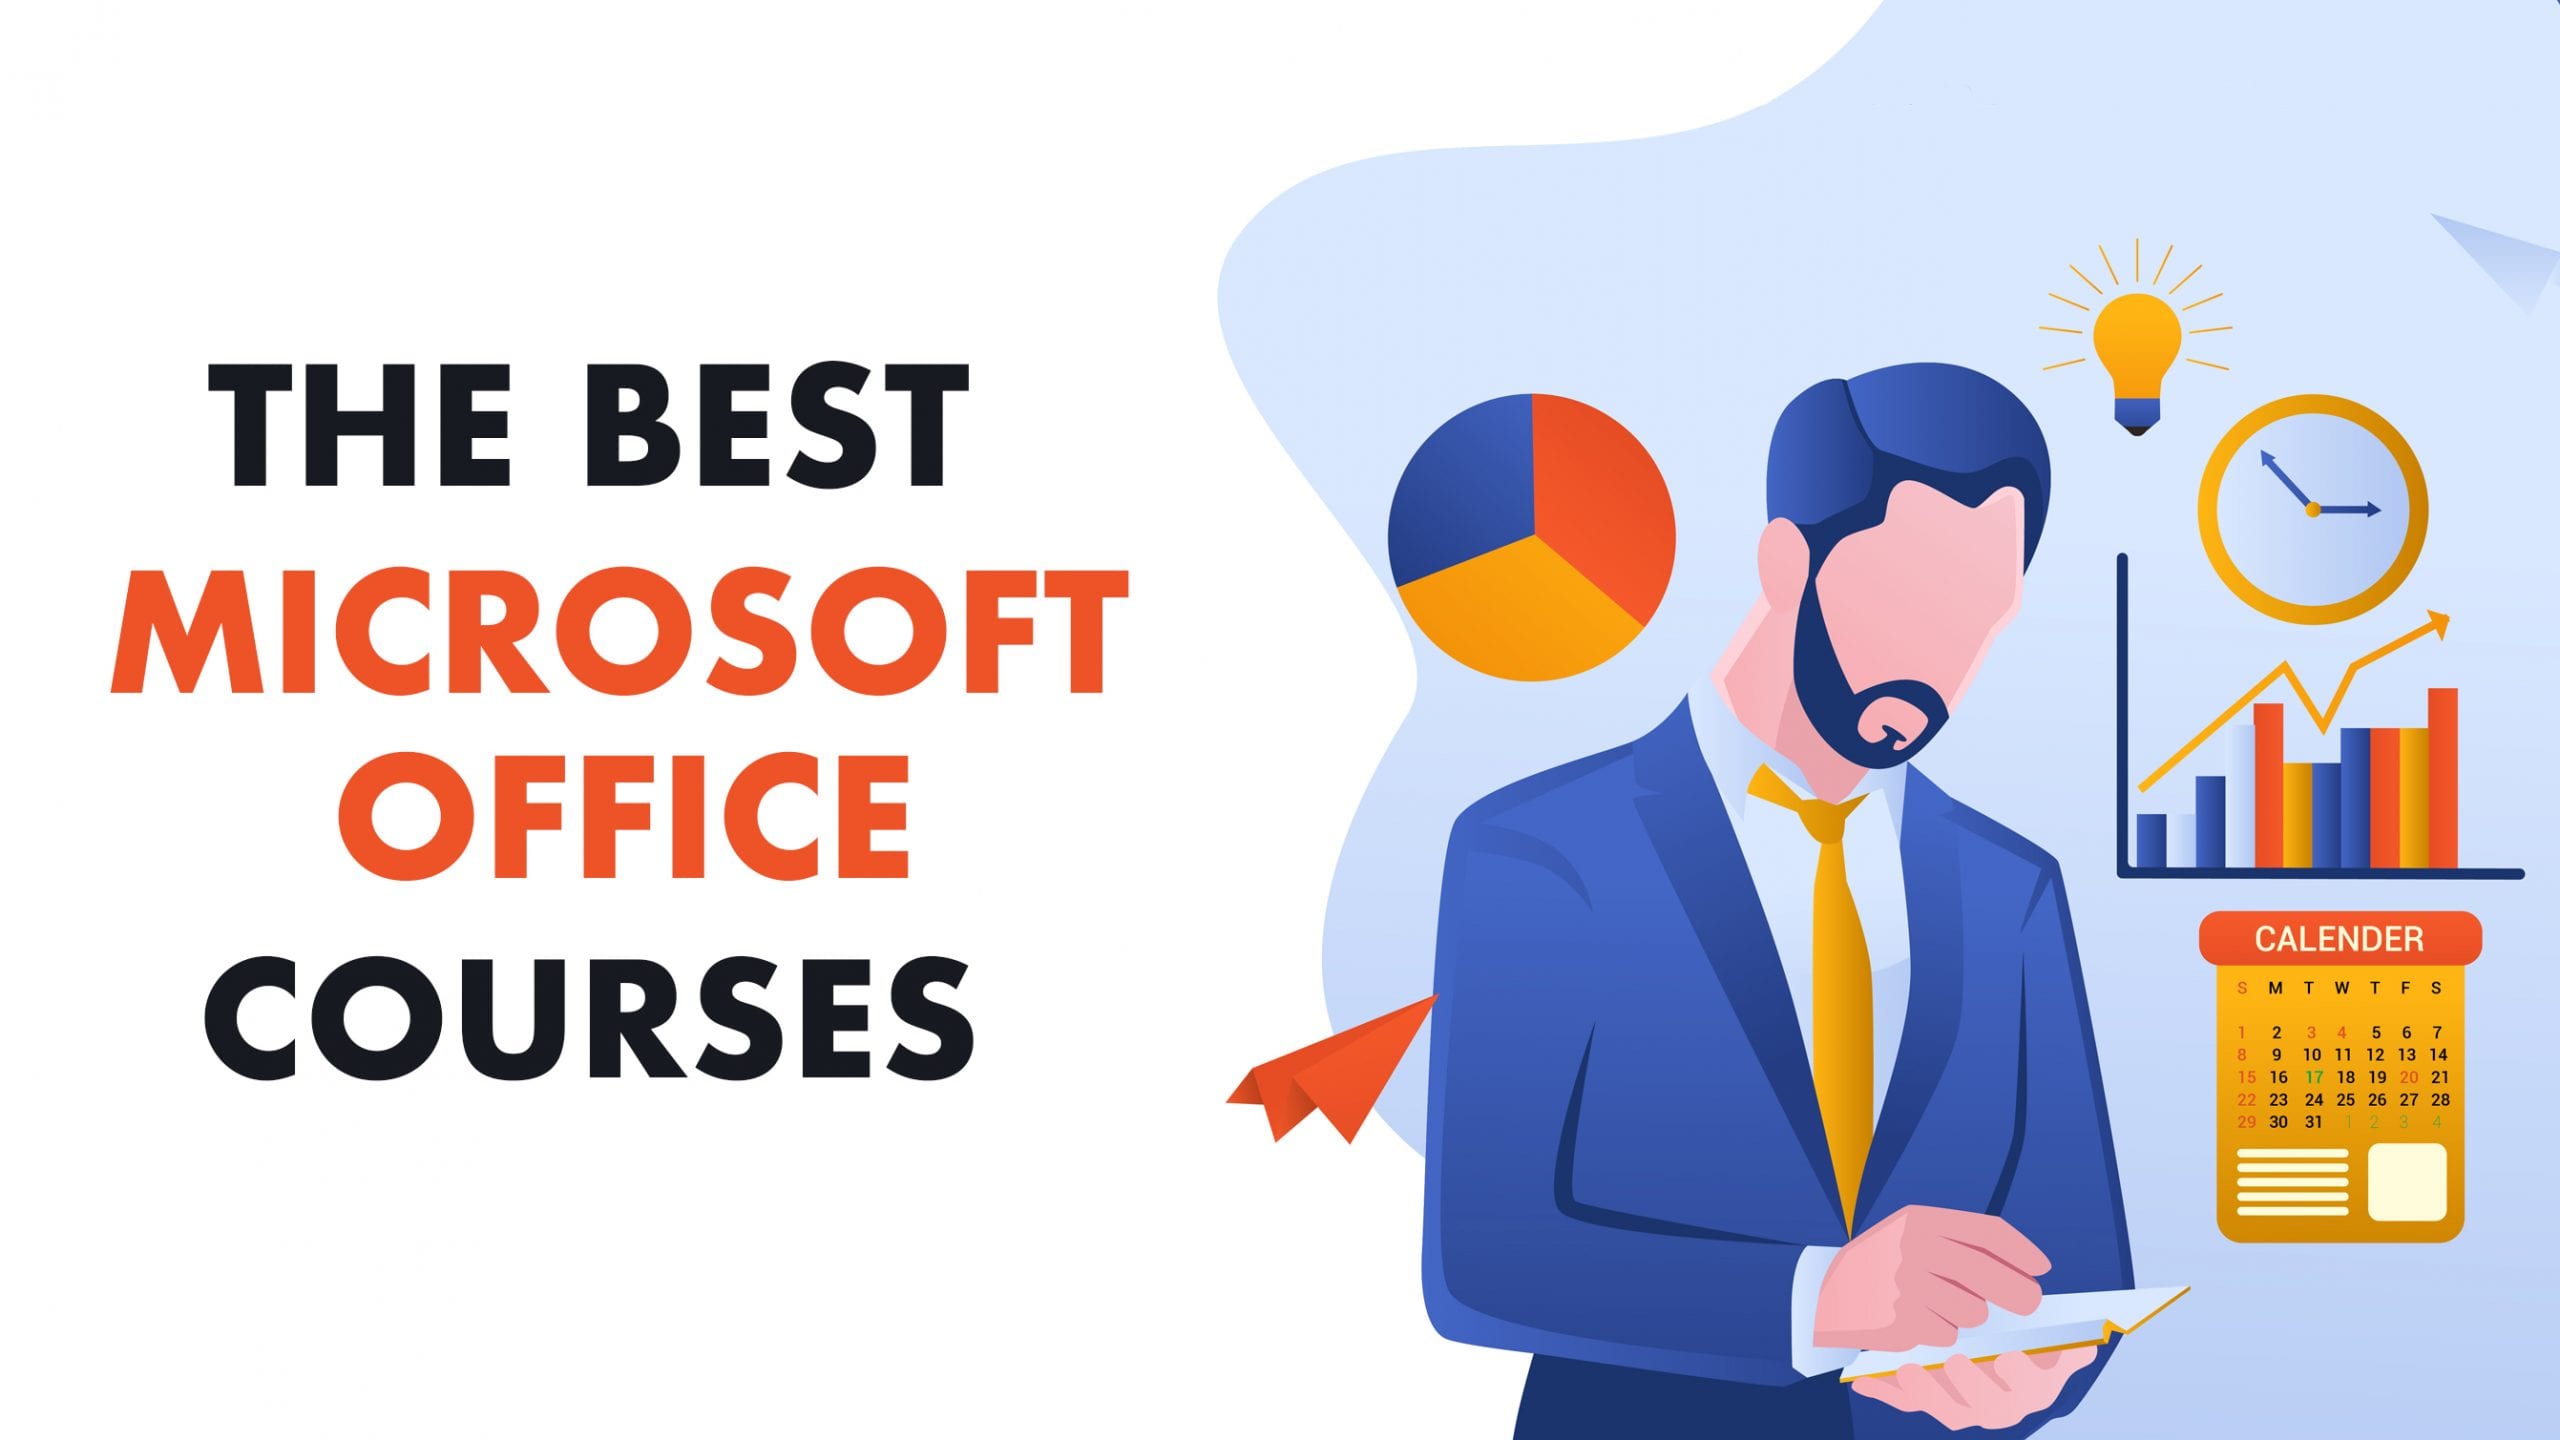 6 Best Microsoft Office Courses, Classes and Trainings (+Certification)